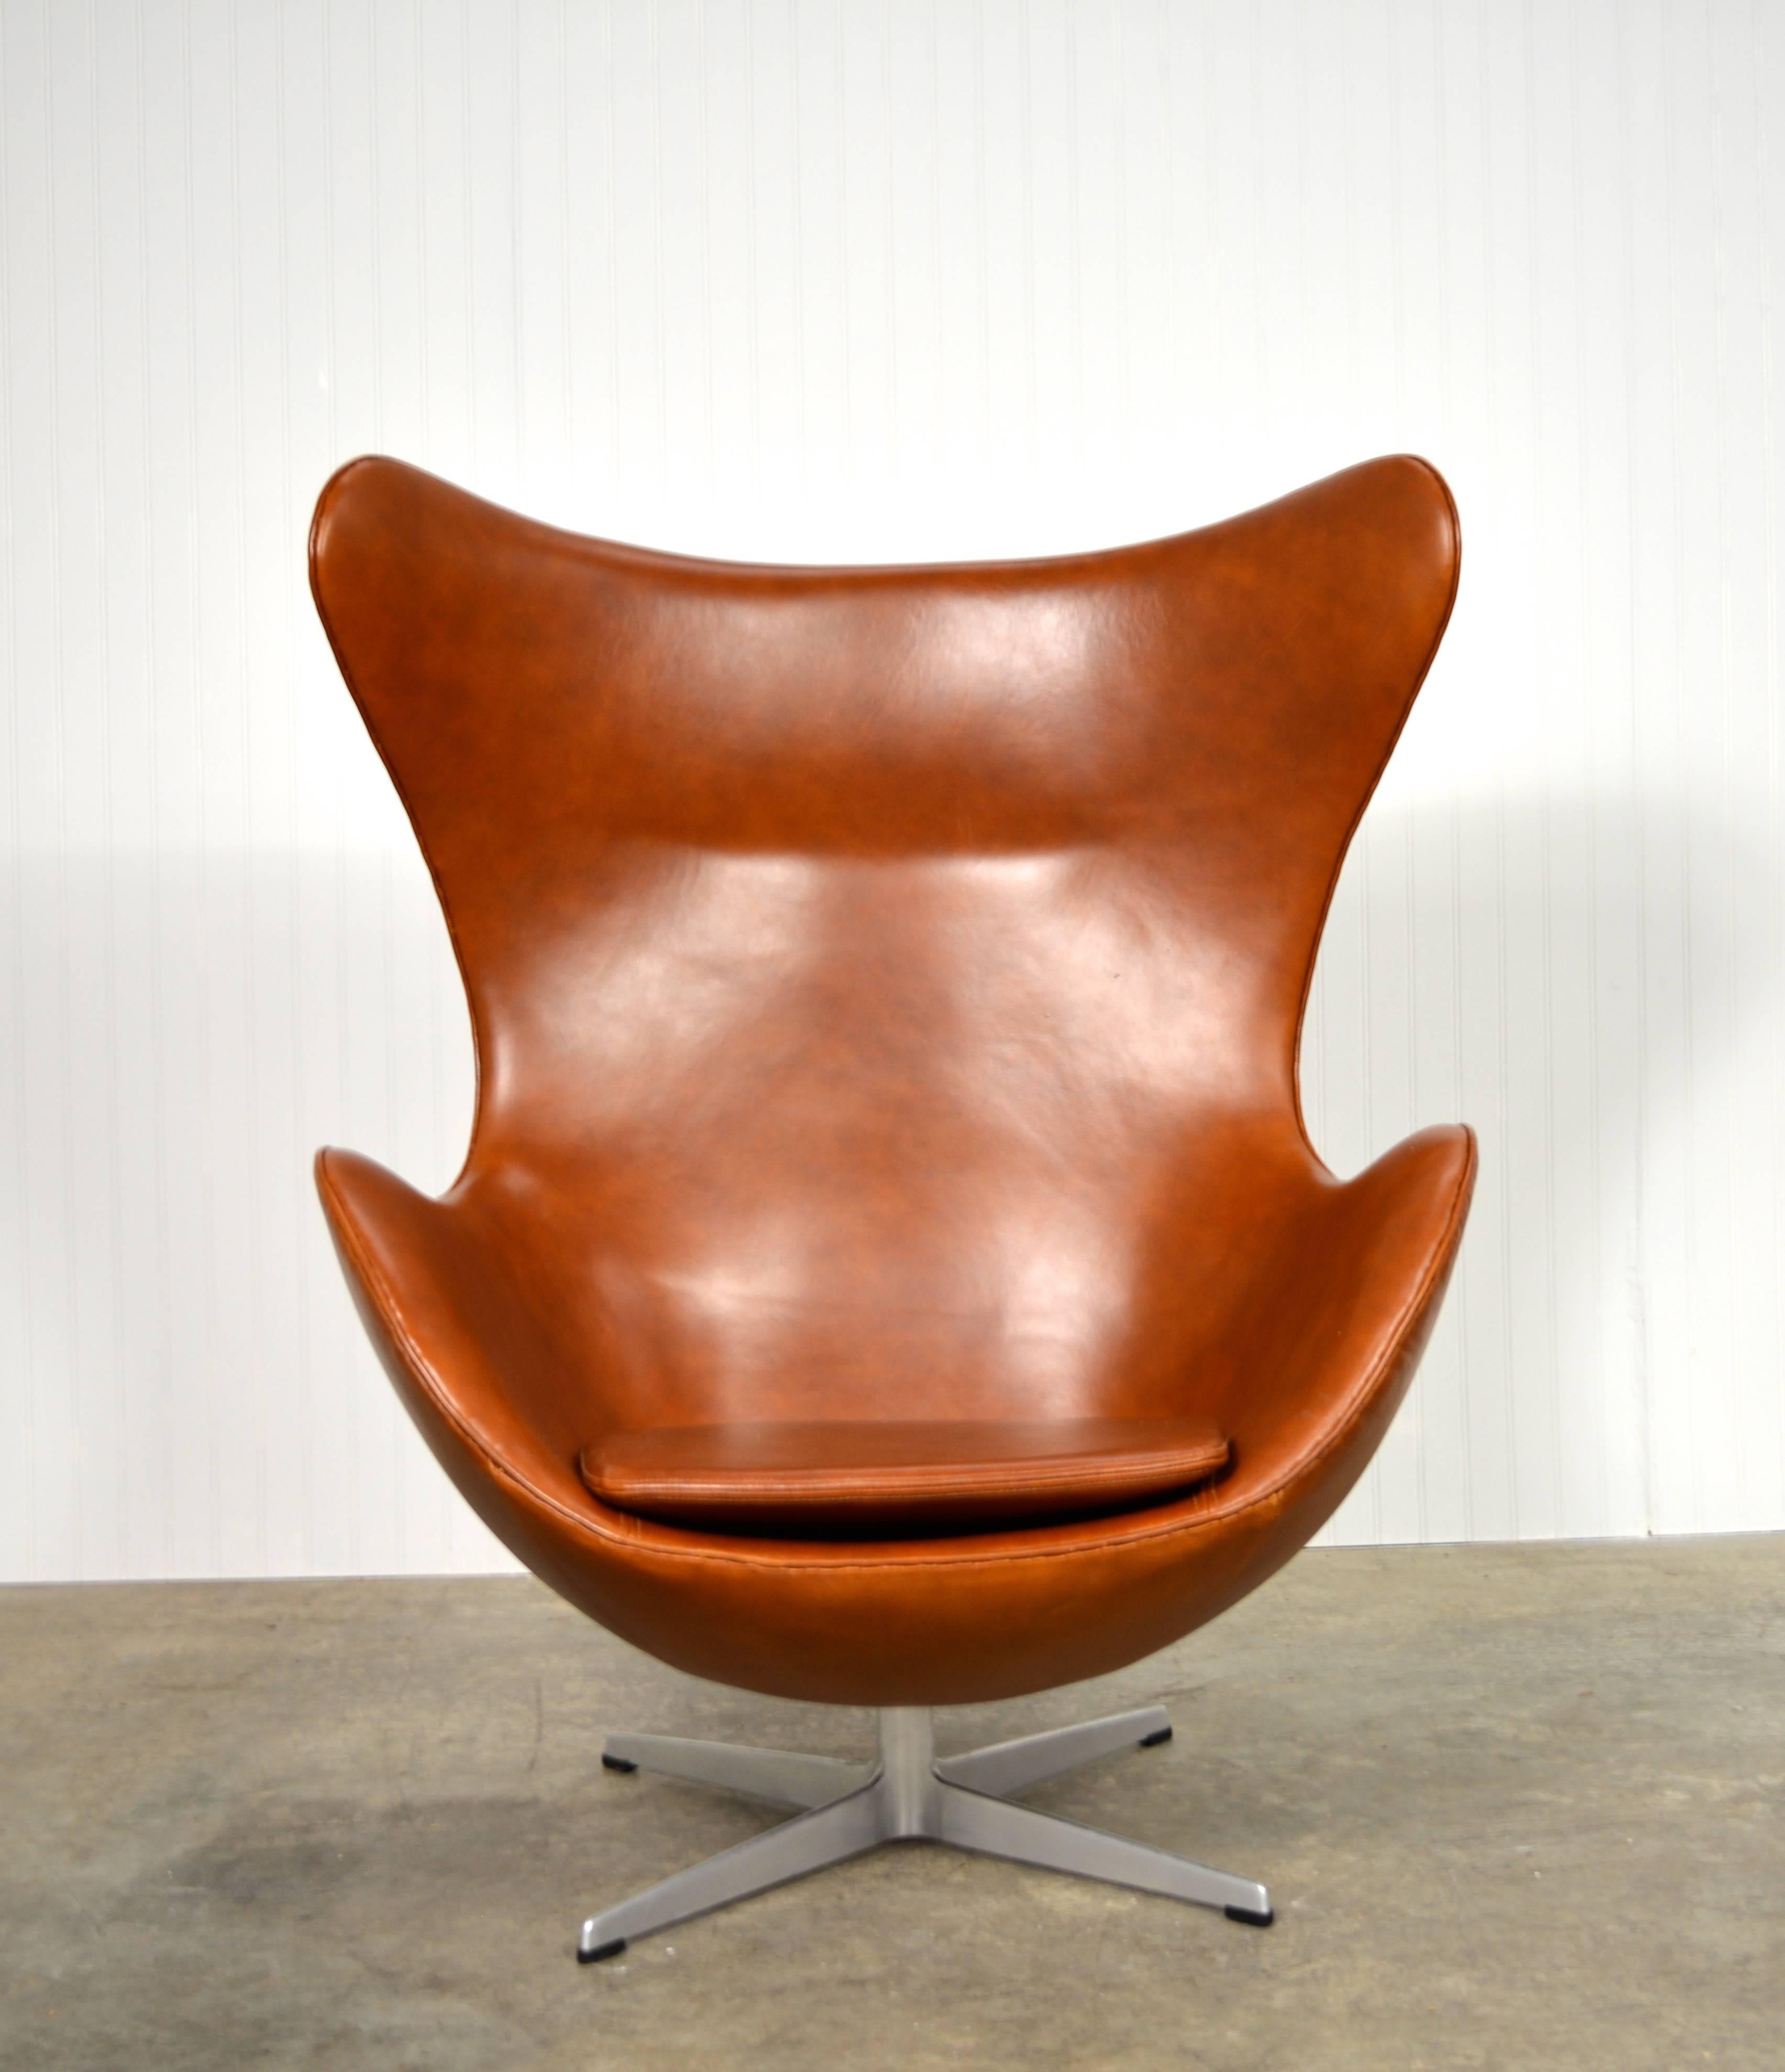 Gorgeous egg chair and ottoman in cognac leather designed by Arne Jacobsen for Fritz Hansen, circa 1966.